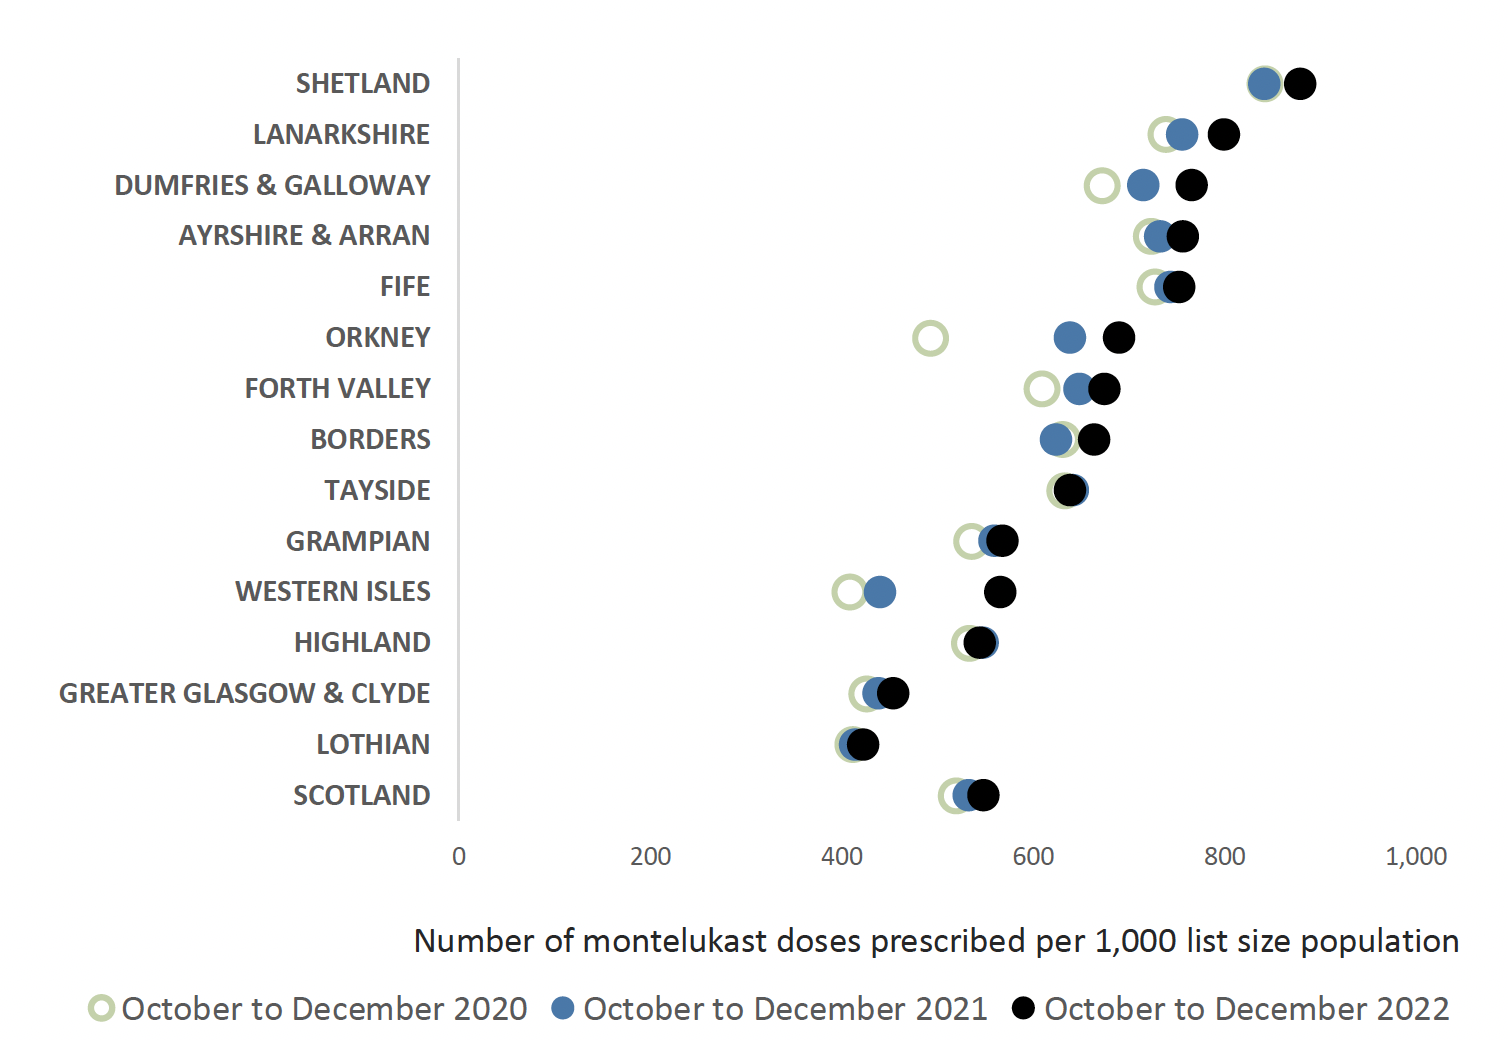 Chart showing number of Montelukast doses prescribed compared across health boards and Scotland from 2020 to 2022. Overall Scotland trend is increasing